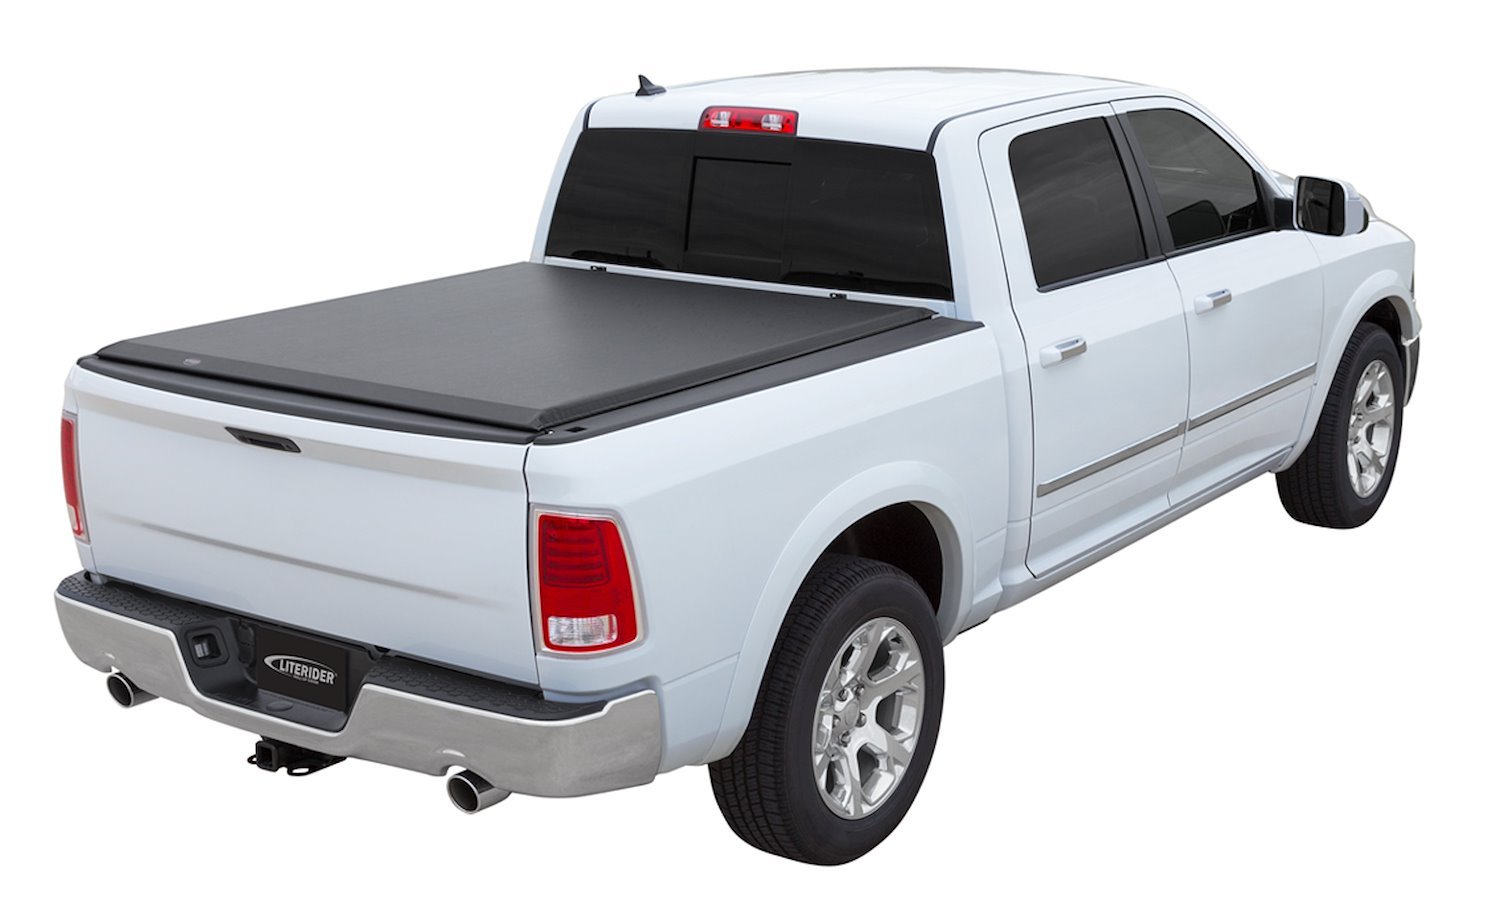 LITERIDER Roll-Up Tonneau Cover, 2009-2018 Ram 1500, Fits Select Ram Classic, 2010-2018 Ram 2500/3500, with 6 ft. 4 in. Bed